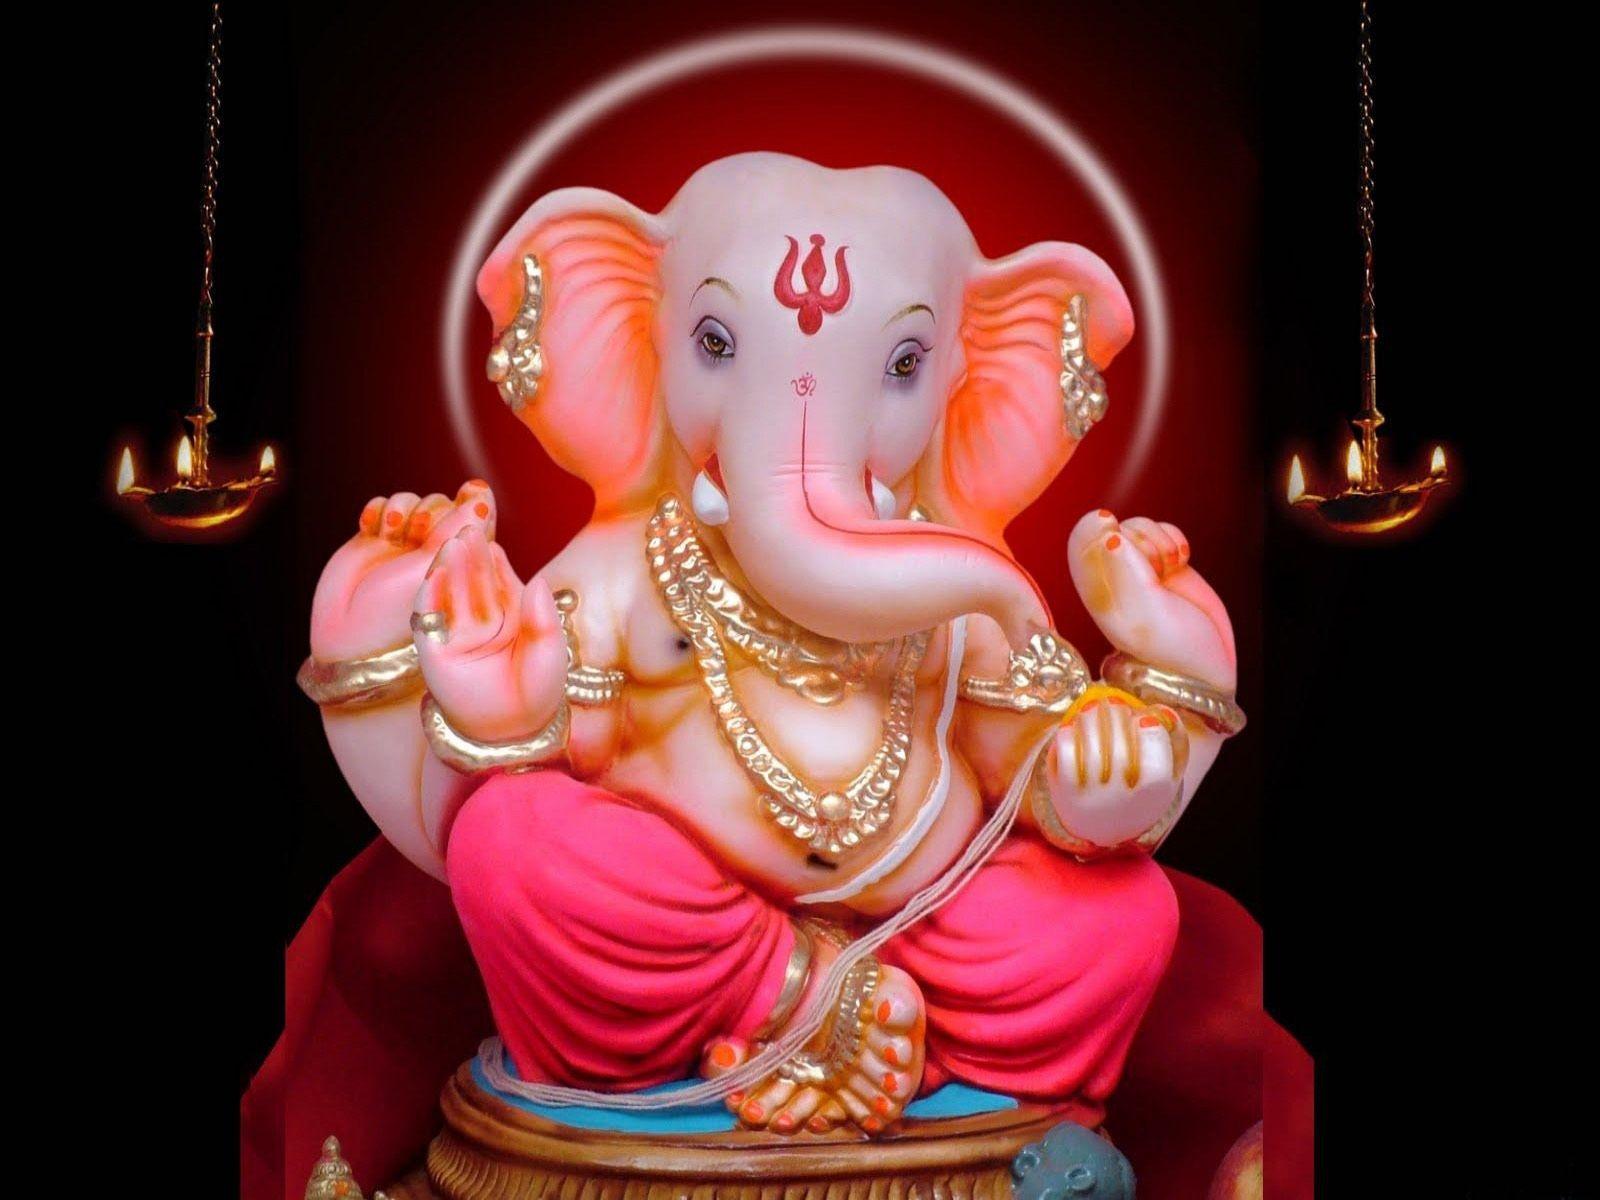 Happy Ganesh Chaturthi 2021 Wishes: Ganpati Images, Wishes, SMS, Wallpapers,  Messages, Facebook, WhatsApp Status